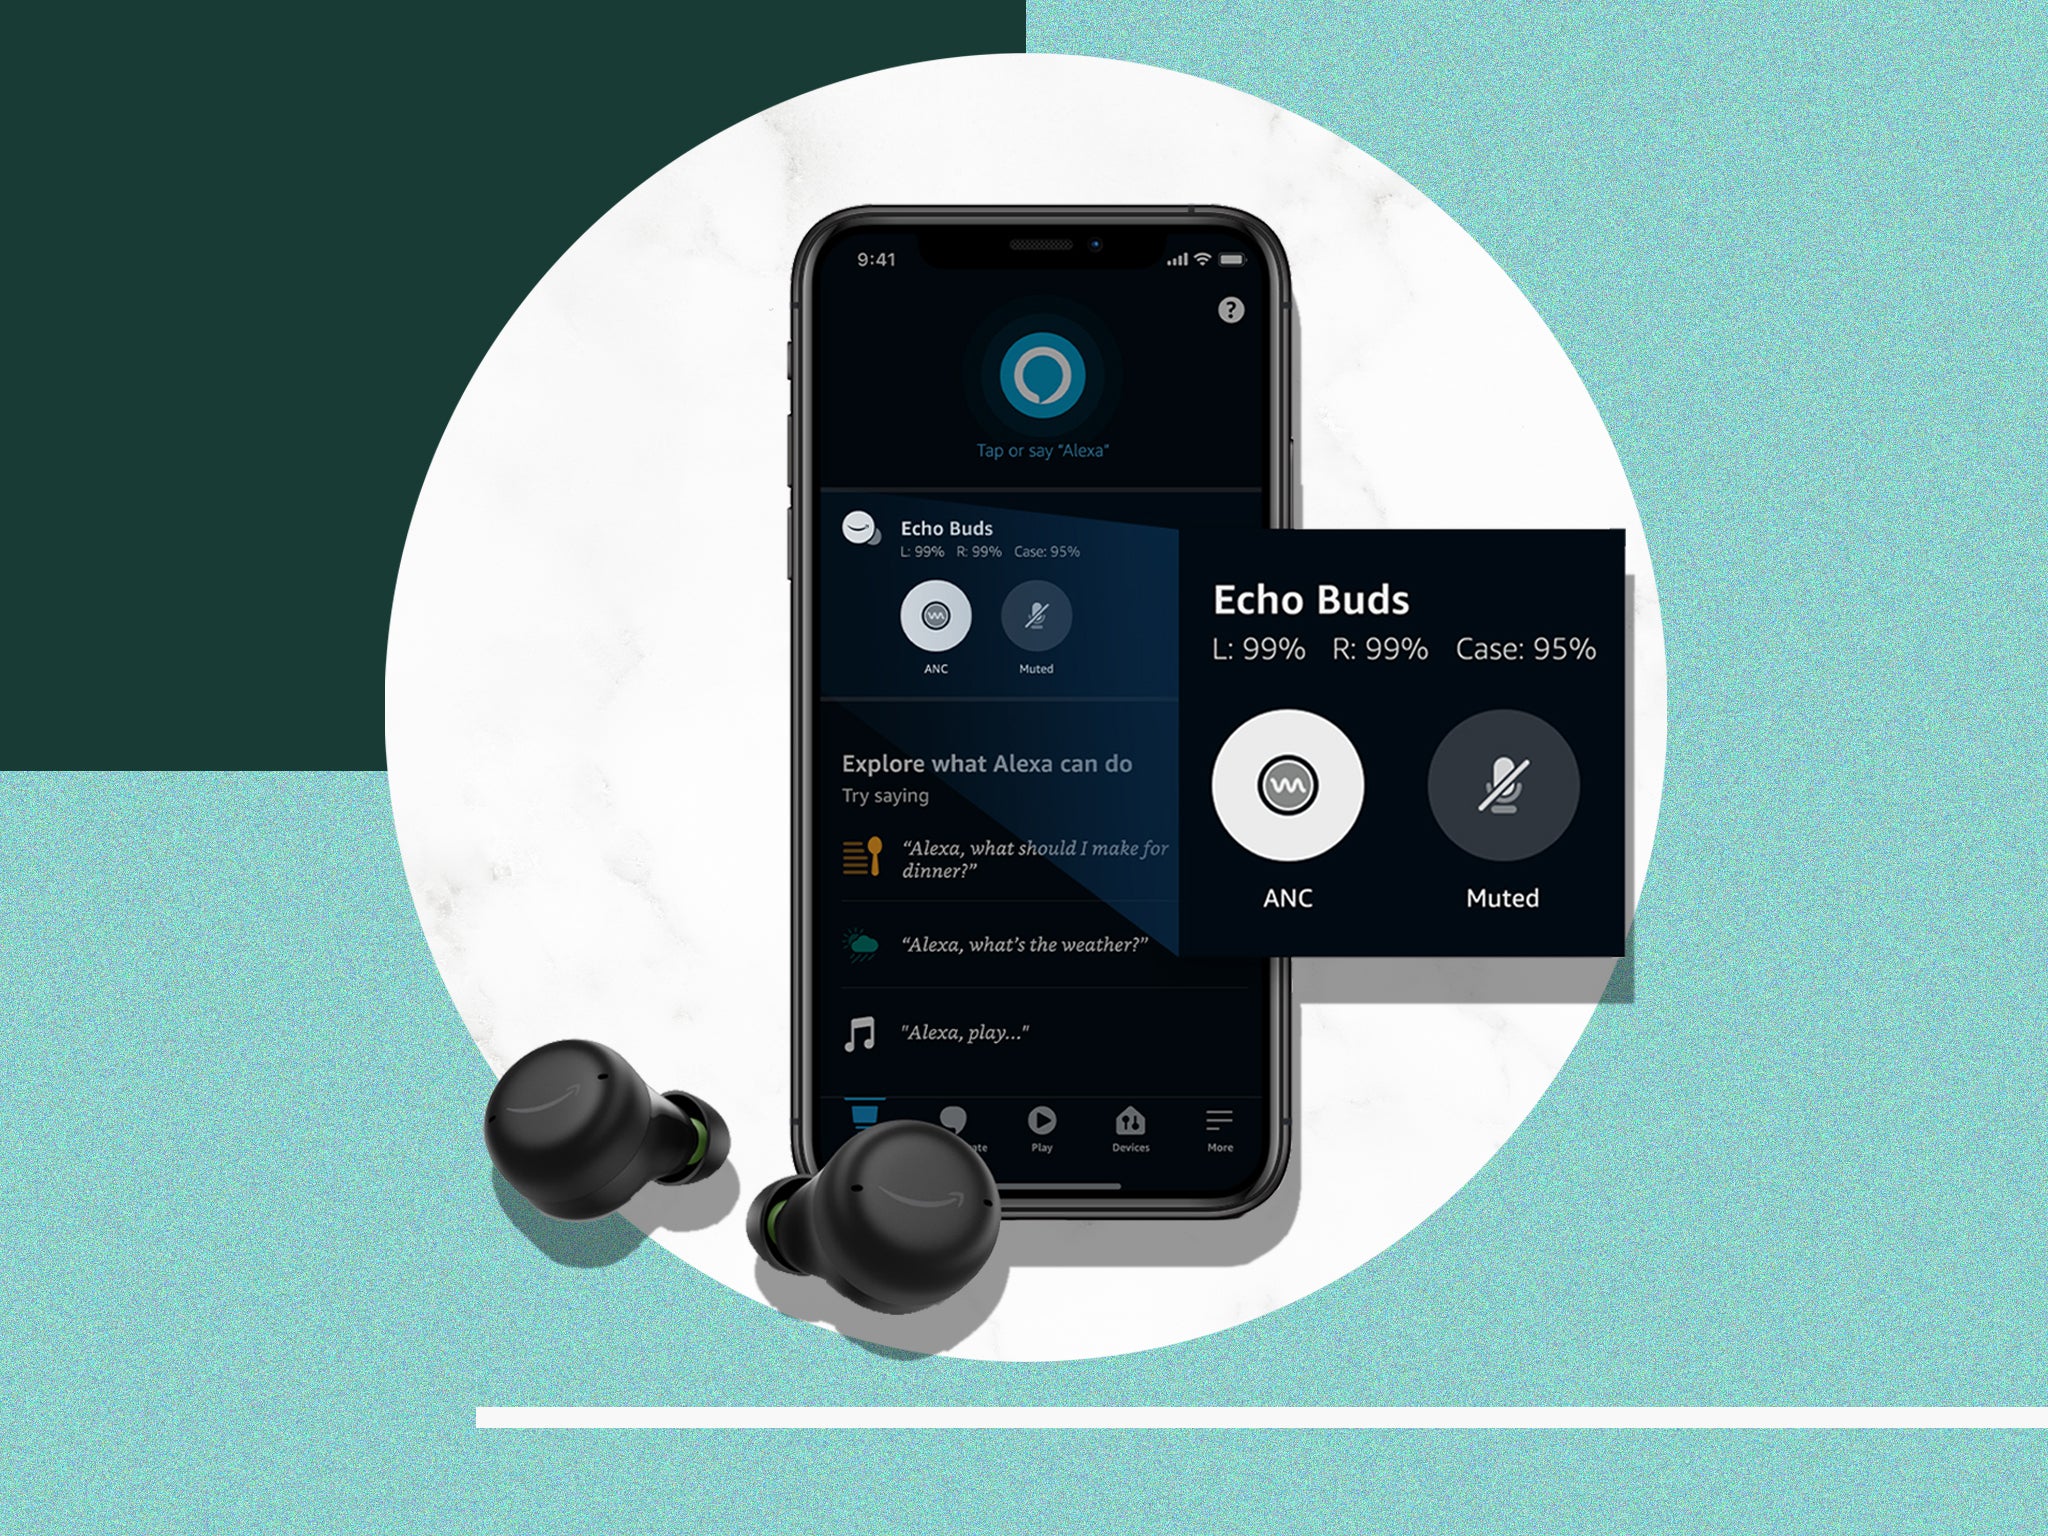 s new Echo buds 2nd gen: Price, release date and how to pre-order